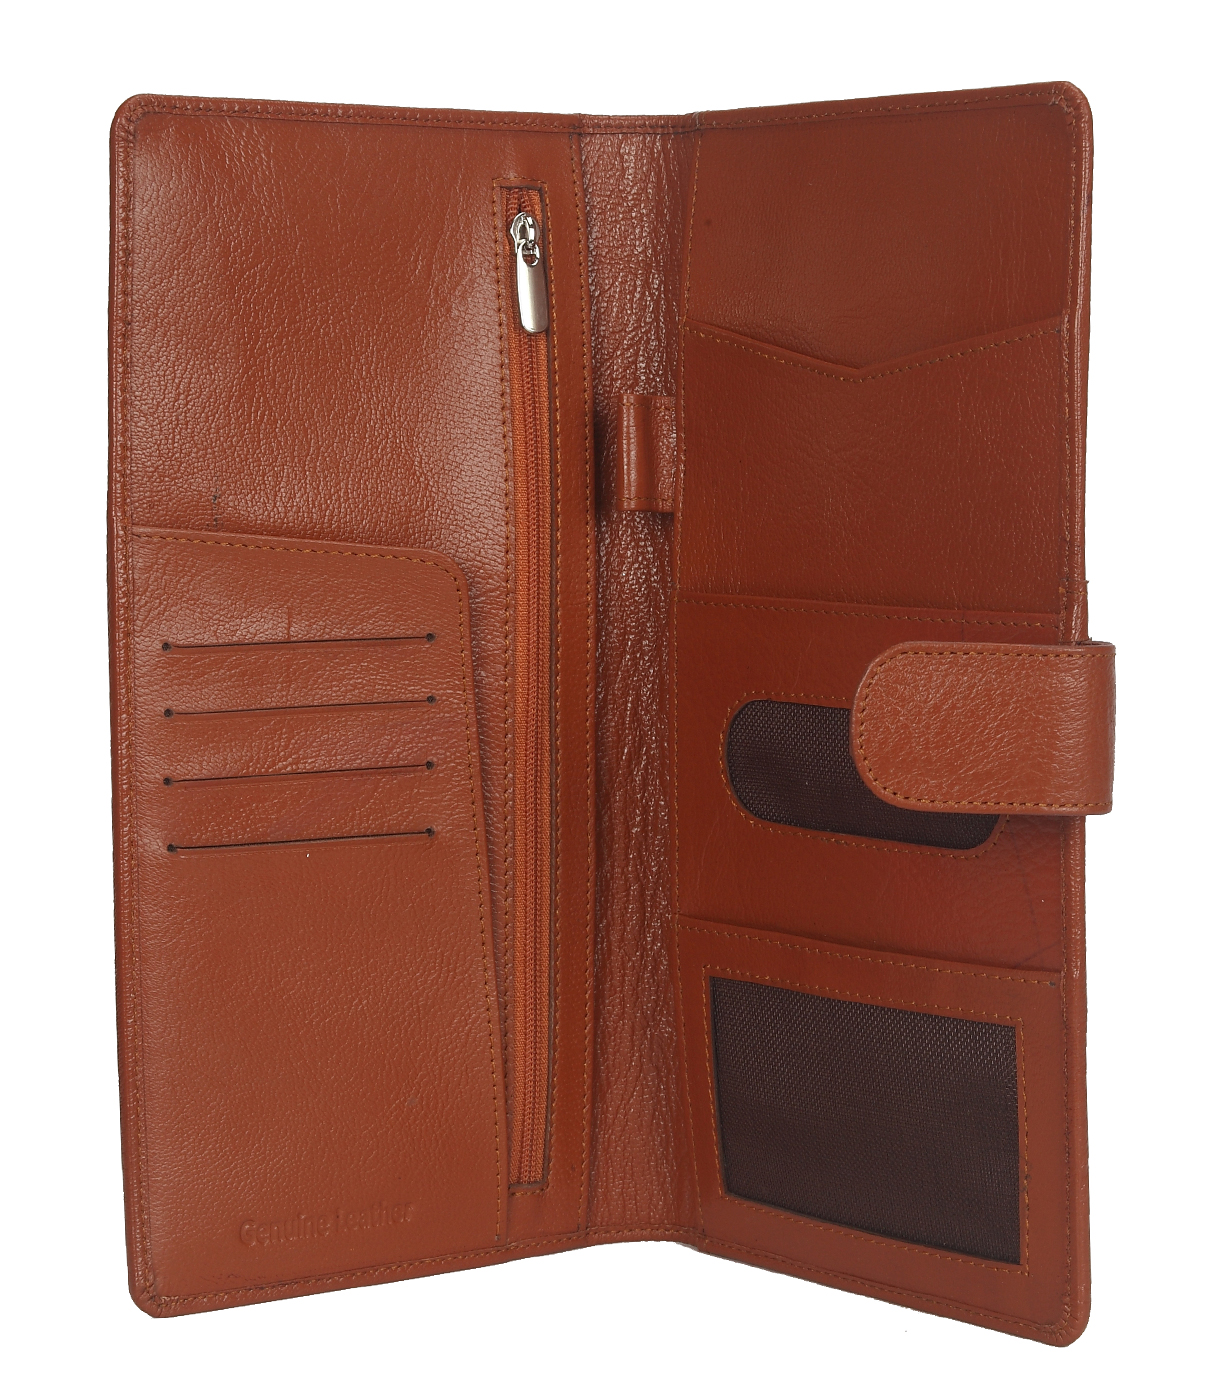 W247-Cynthia-Unisex wallet for travel documents in Genuine Leather - Tan